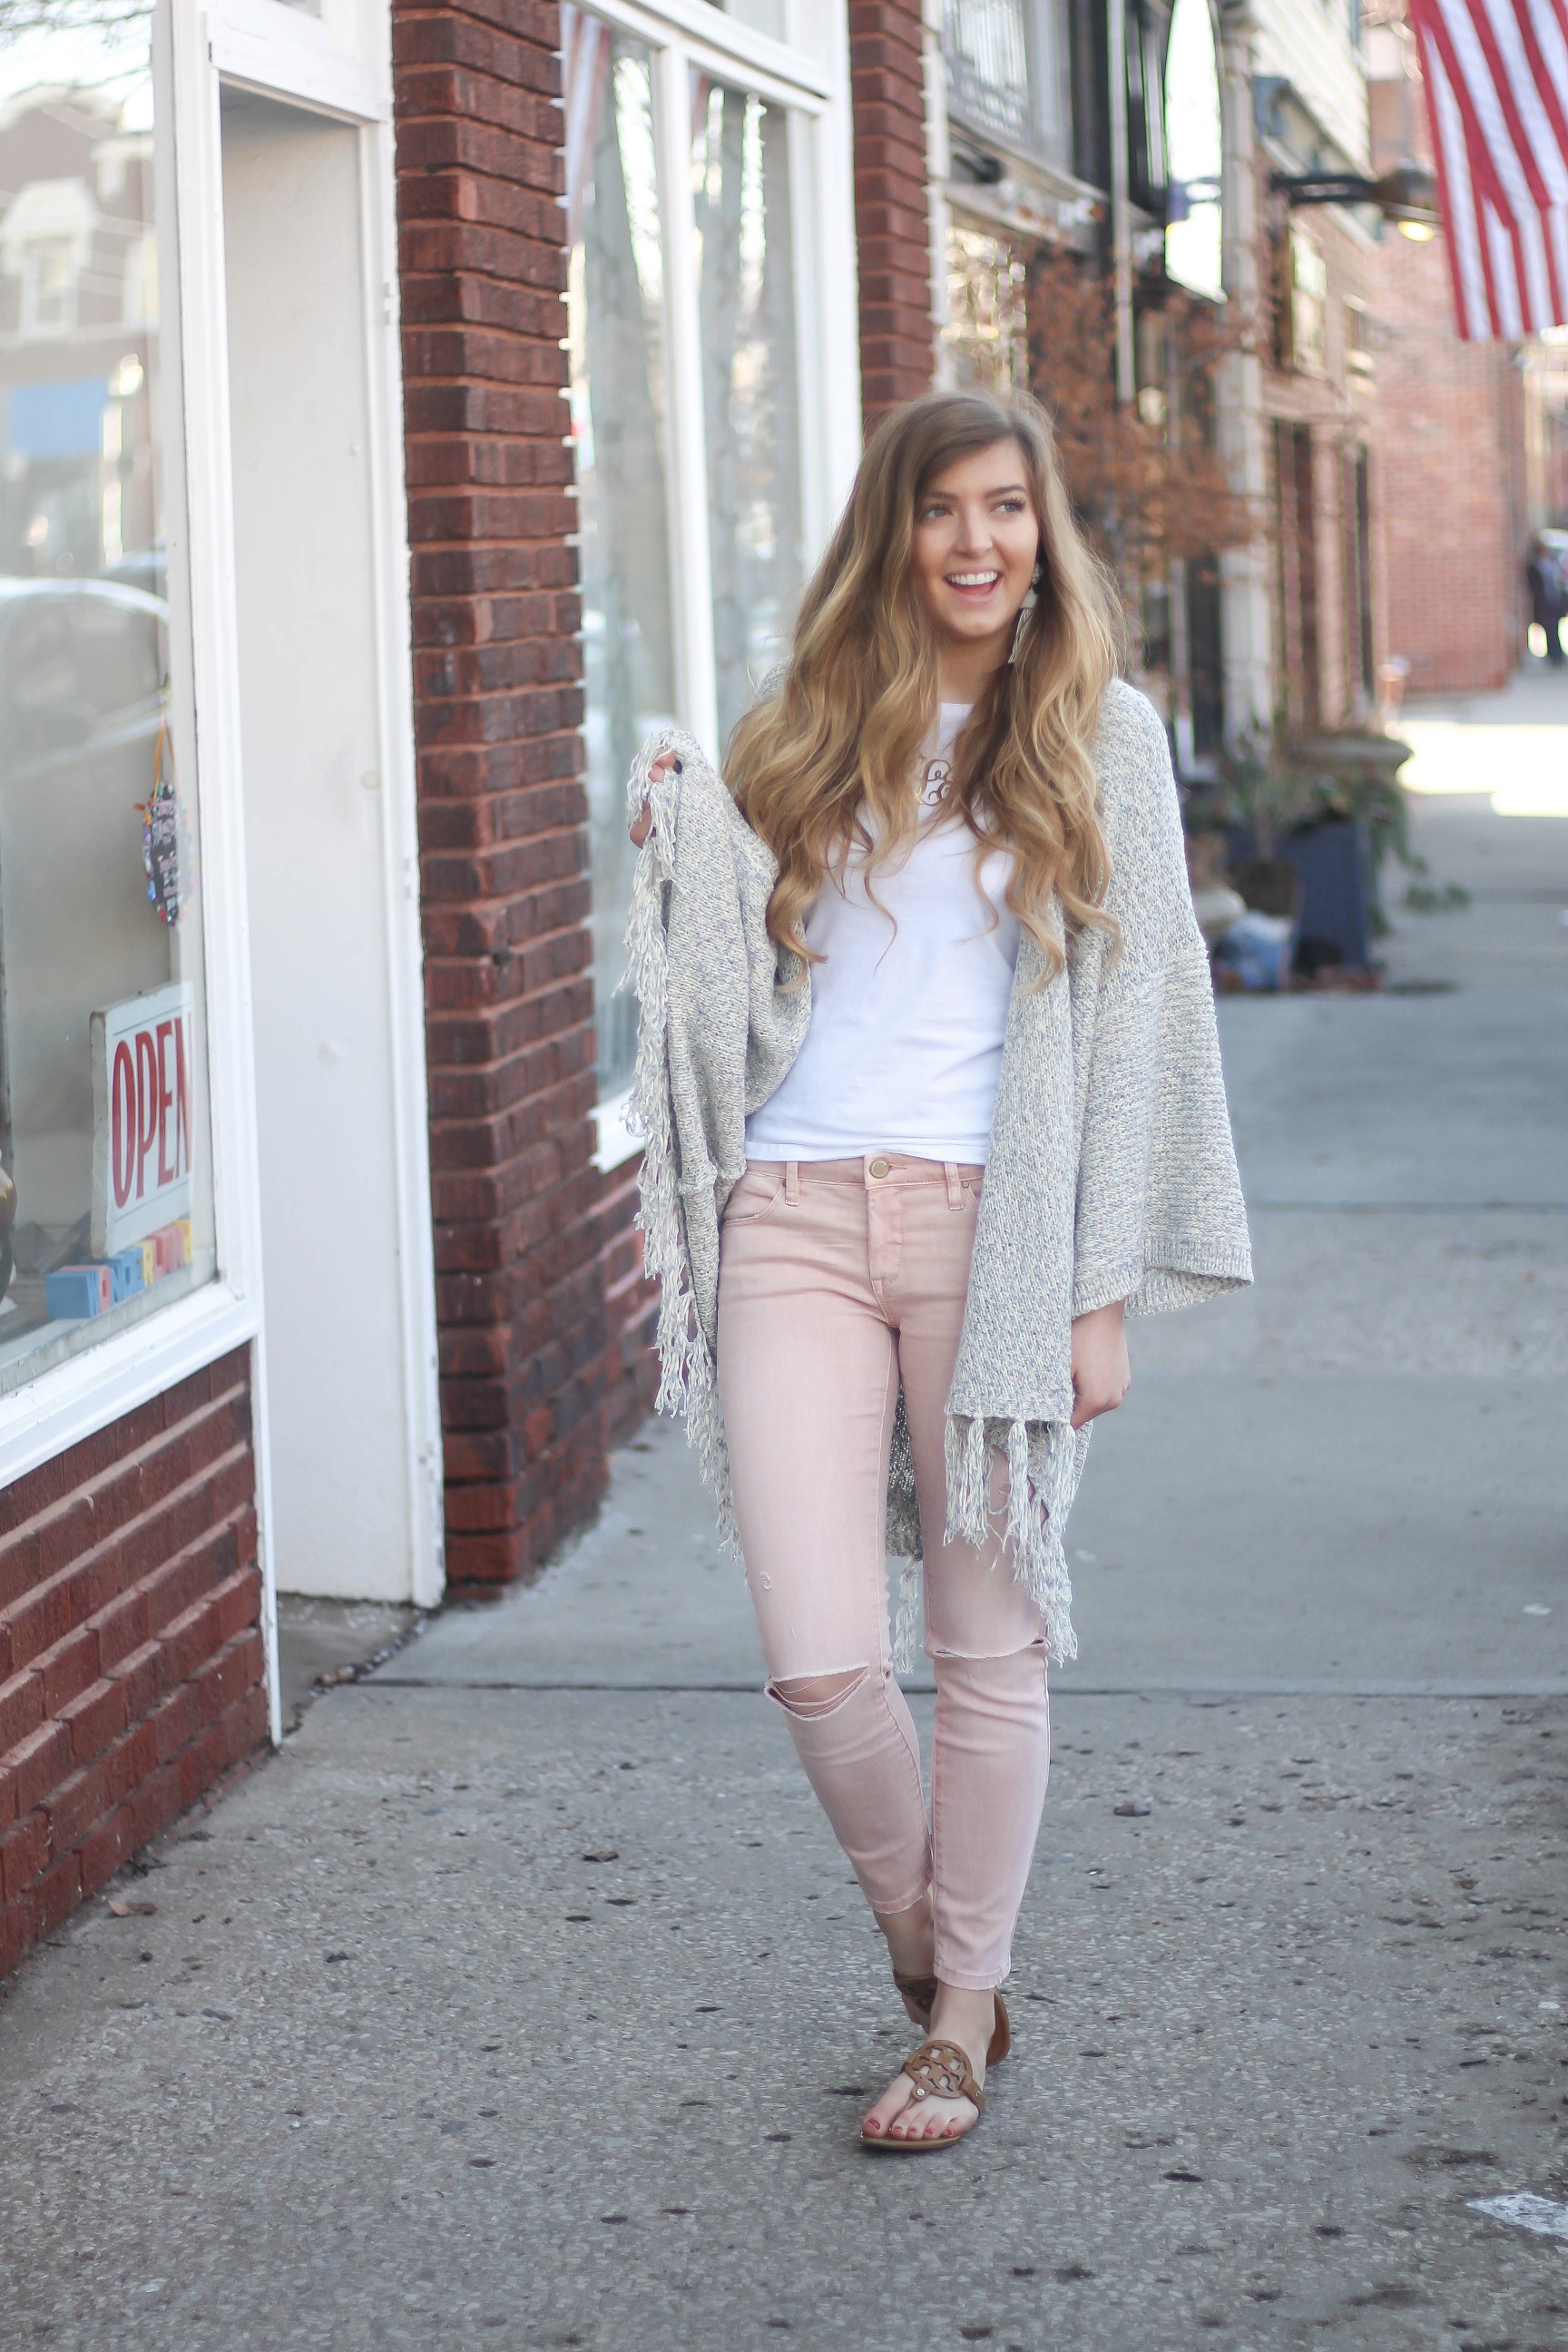 Cardigans aren't just for winter! My favorite spring cardigan is perfect with my pink jeans! I accessorized with my monogram necklace and tassel earrings! By Lauren Lindmark on dailydoseofcharm.com daily dose of charm